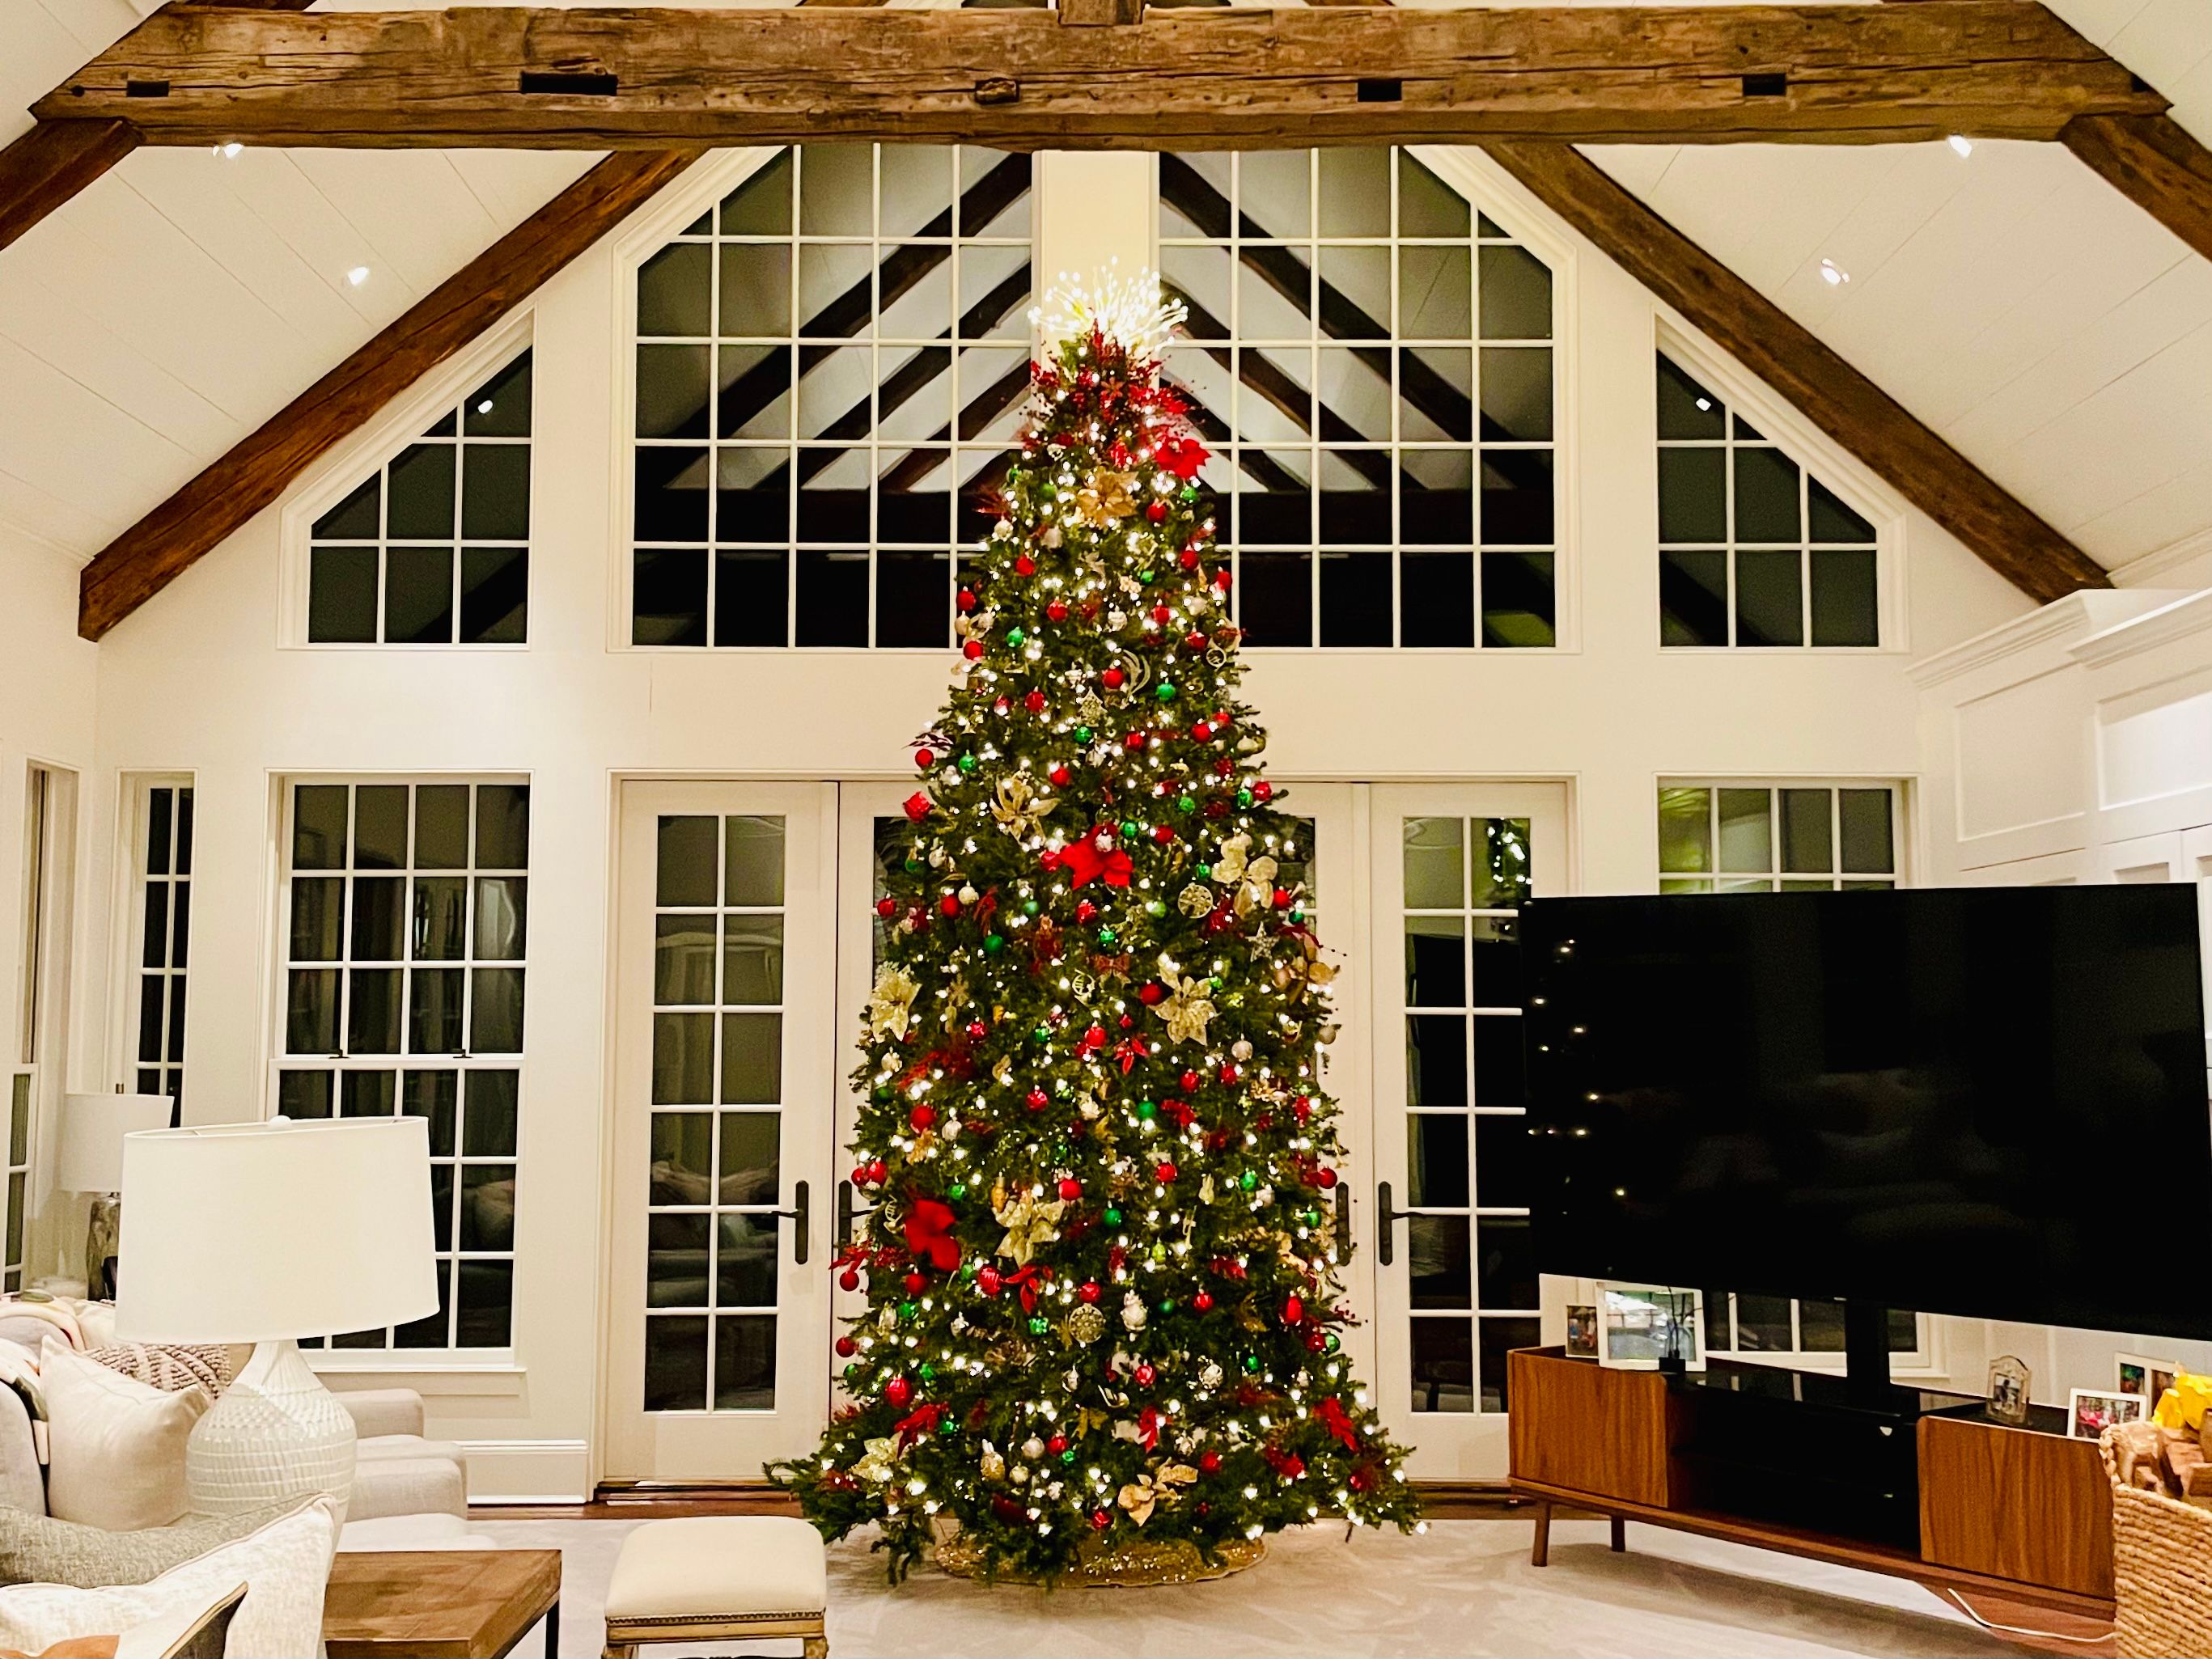 Decorated Christmas tree, living room